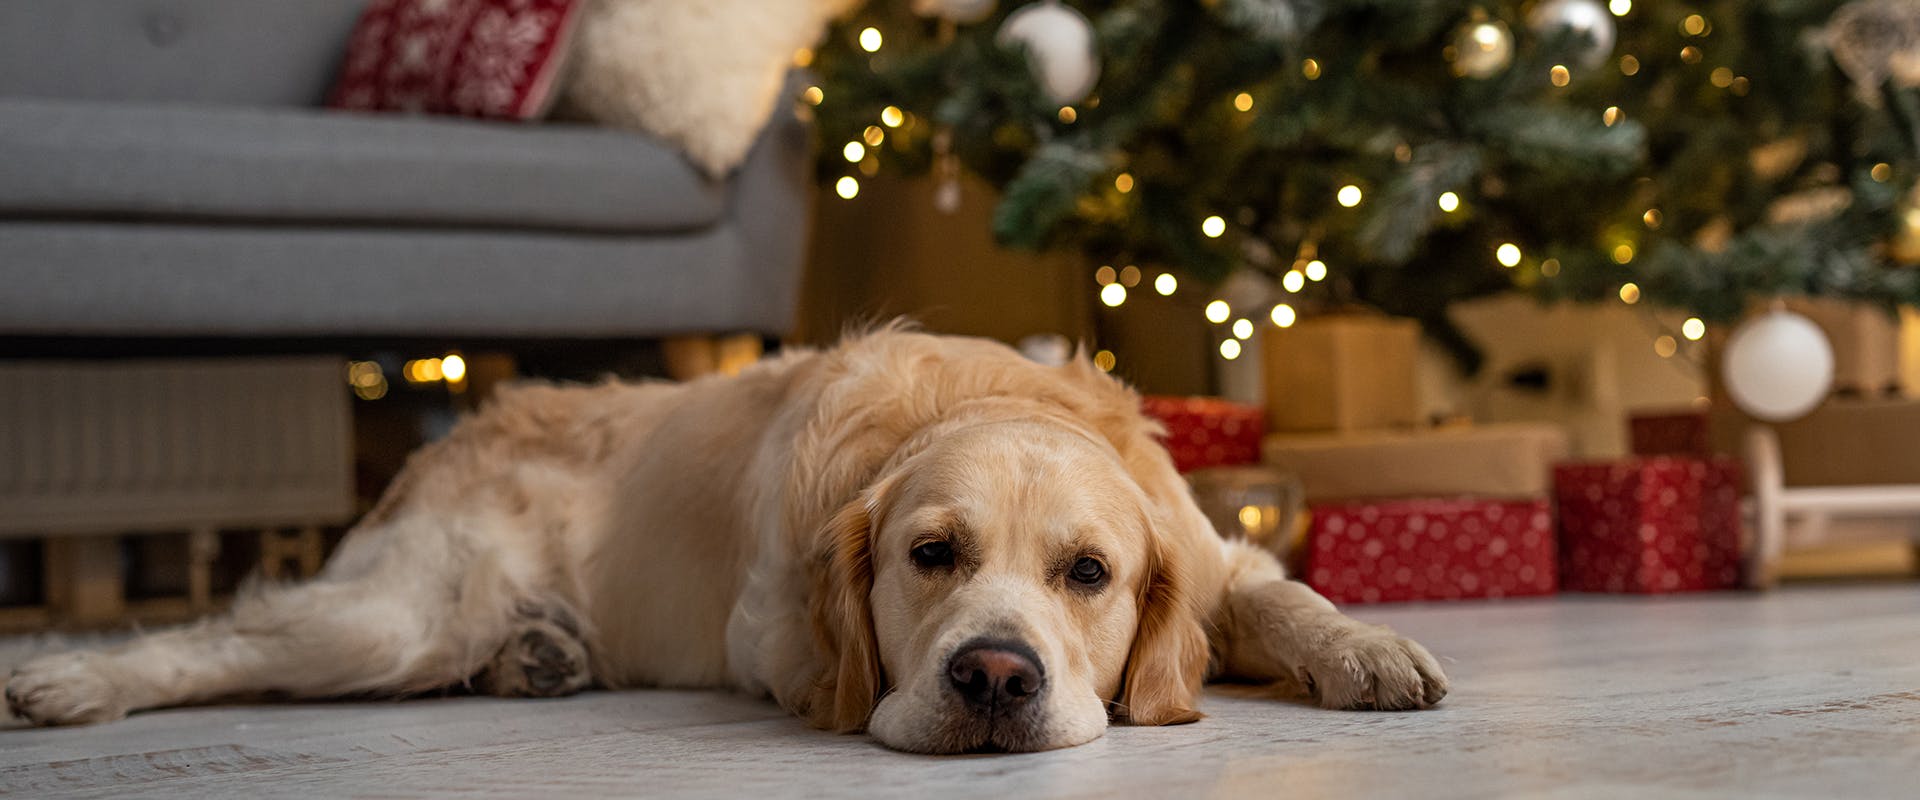 A Golden Retriever laying on the floor, a sparkling festive Christmas tree in the background